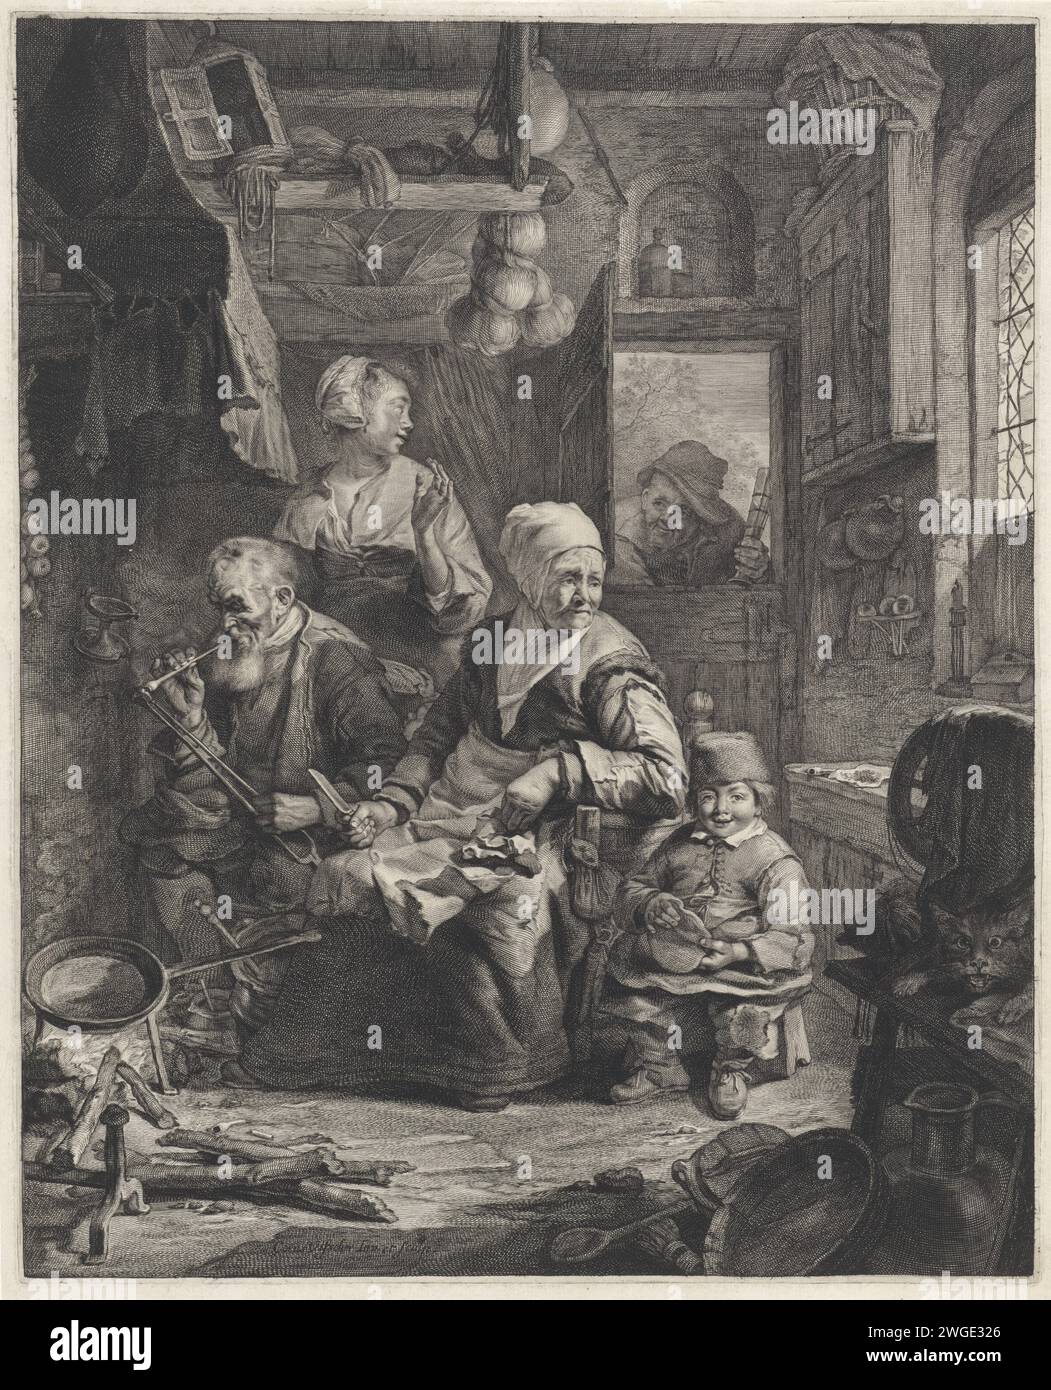 Pancake Bakster, Cornelis Visscher (II), 1638 - 1658 print In a kitchen an old woman is baking pancakes for a fire. The frying pan is on the fire. Next to her a man with a pipe and a child with a pancake. Behind the smoking man a young woman and a small child. In the doorway is an old man with a glass. On the right a cat. Haarlem paper etching / engraving pancakes. kitchen-interior. cat. pipe  tobacco Stock Photo